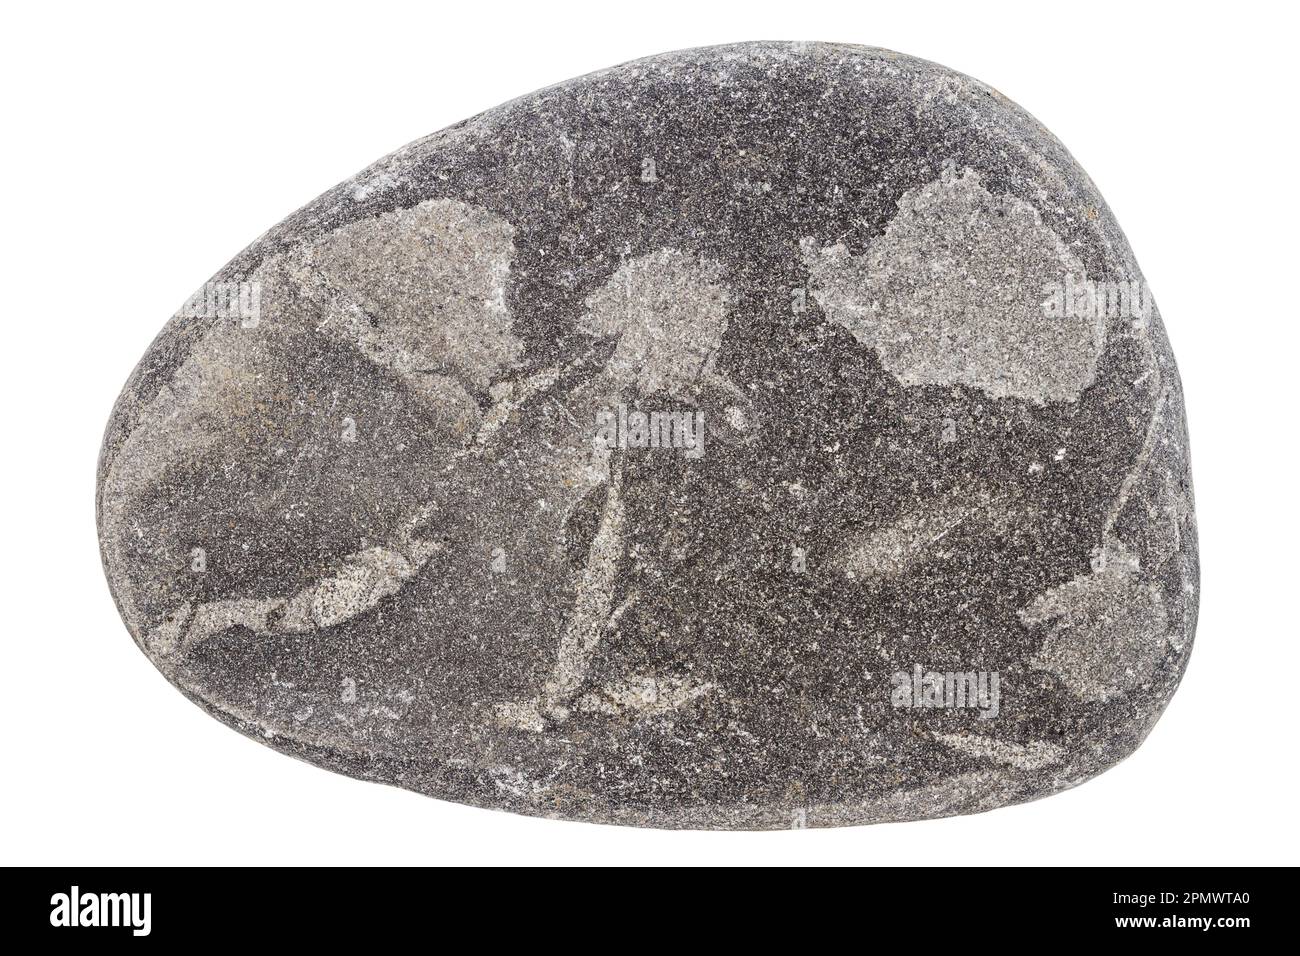 Top view of single black pebble isolated on white background. Stock Photo